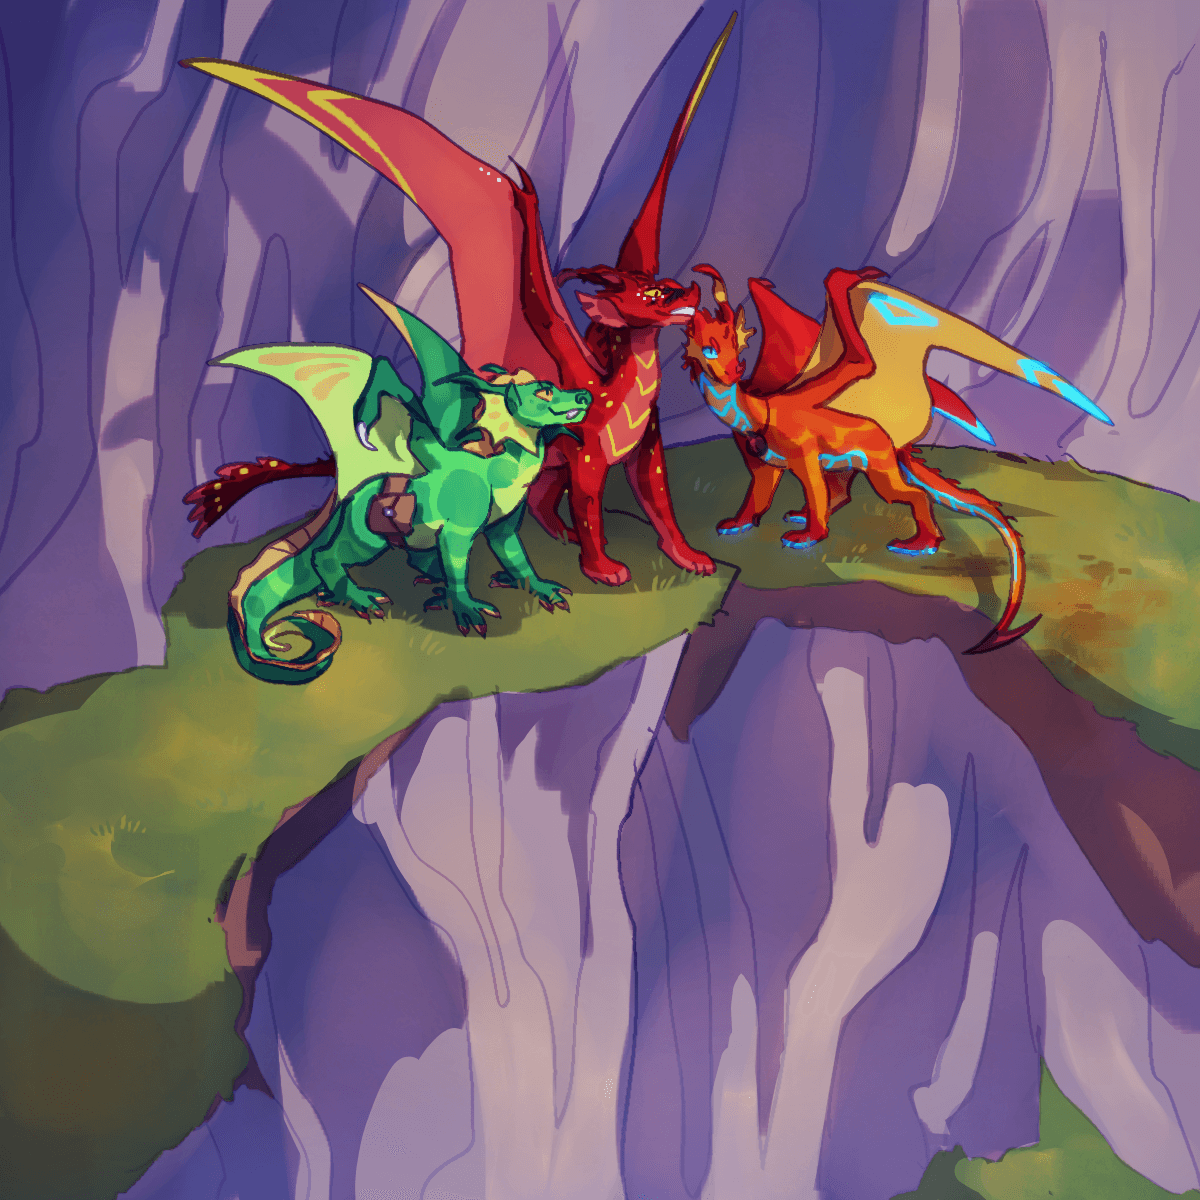 a drawing of chameleon, scarlet, and peril standing on a mountainside and looking off into the distance with triumphant looks. chameleon is out of disguise and peril is wearing her enchanted necklace. a ways behind her are burned patches of grass.